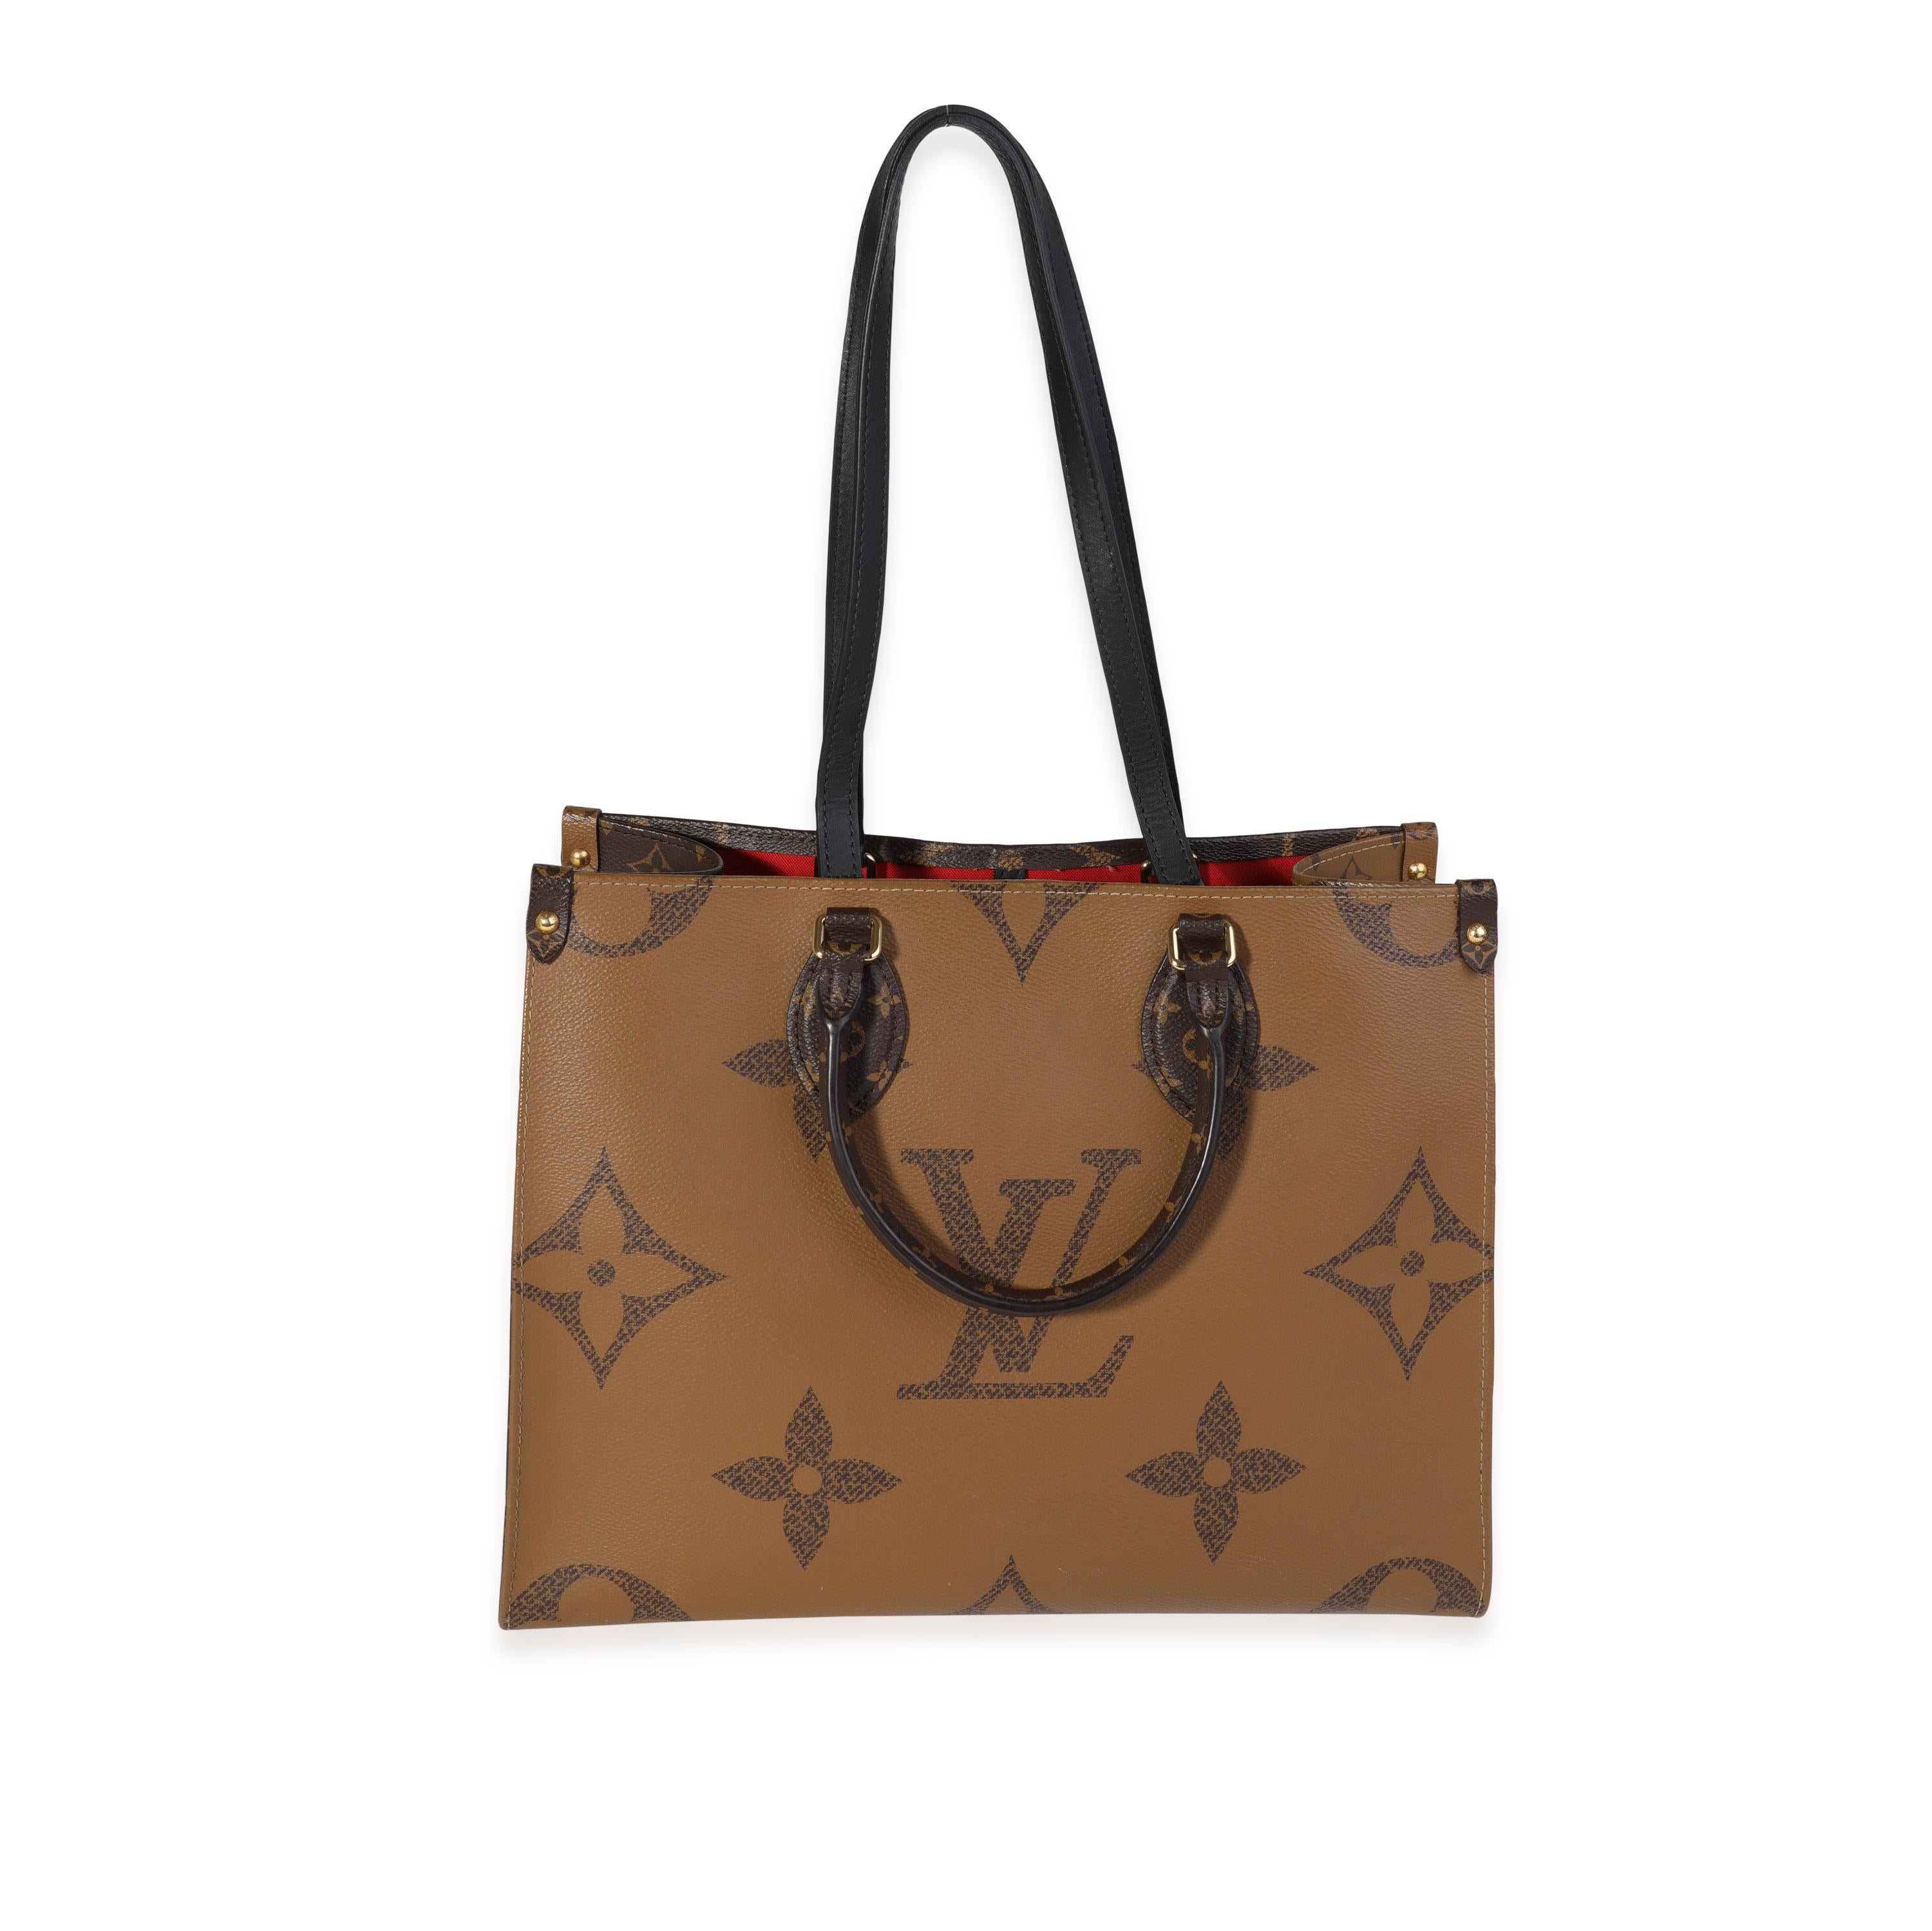 Listing Title: Louis Vuitton Monogram & Monogram Reverse Canvas Onthego MM
SKU: 121340
MSRP: 3250.00
Condition: Pre-owned 
Handbag Condition: Good
Condition Comments: Good Condition. Scuffing to corners and to exterior. Marks to monogram. Scratching